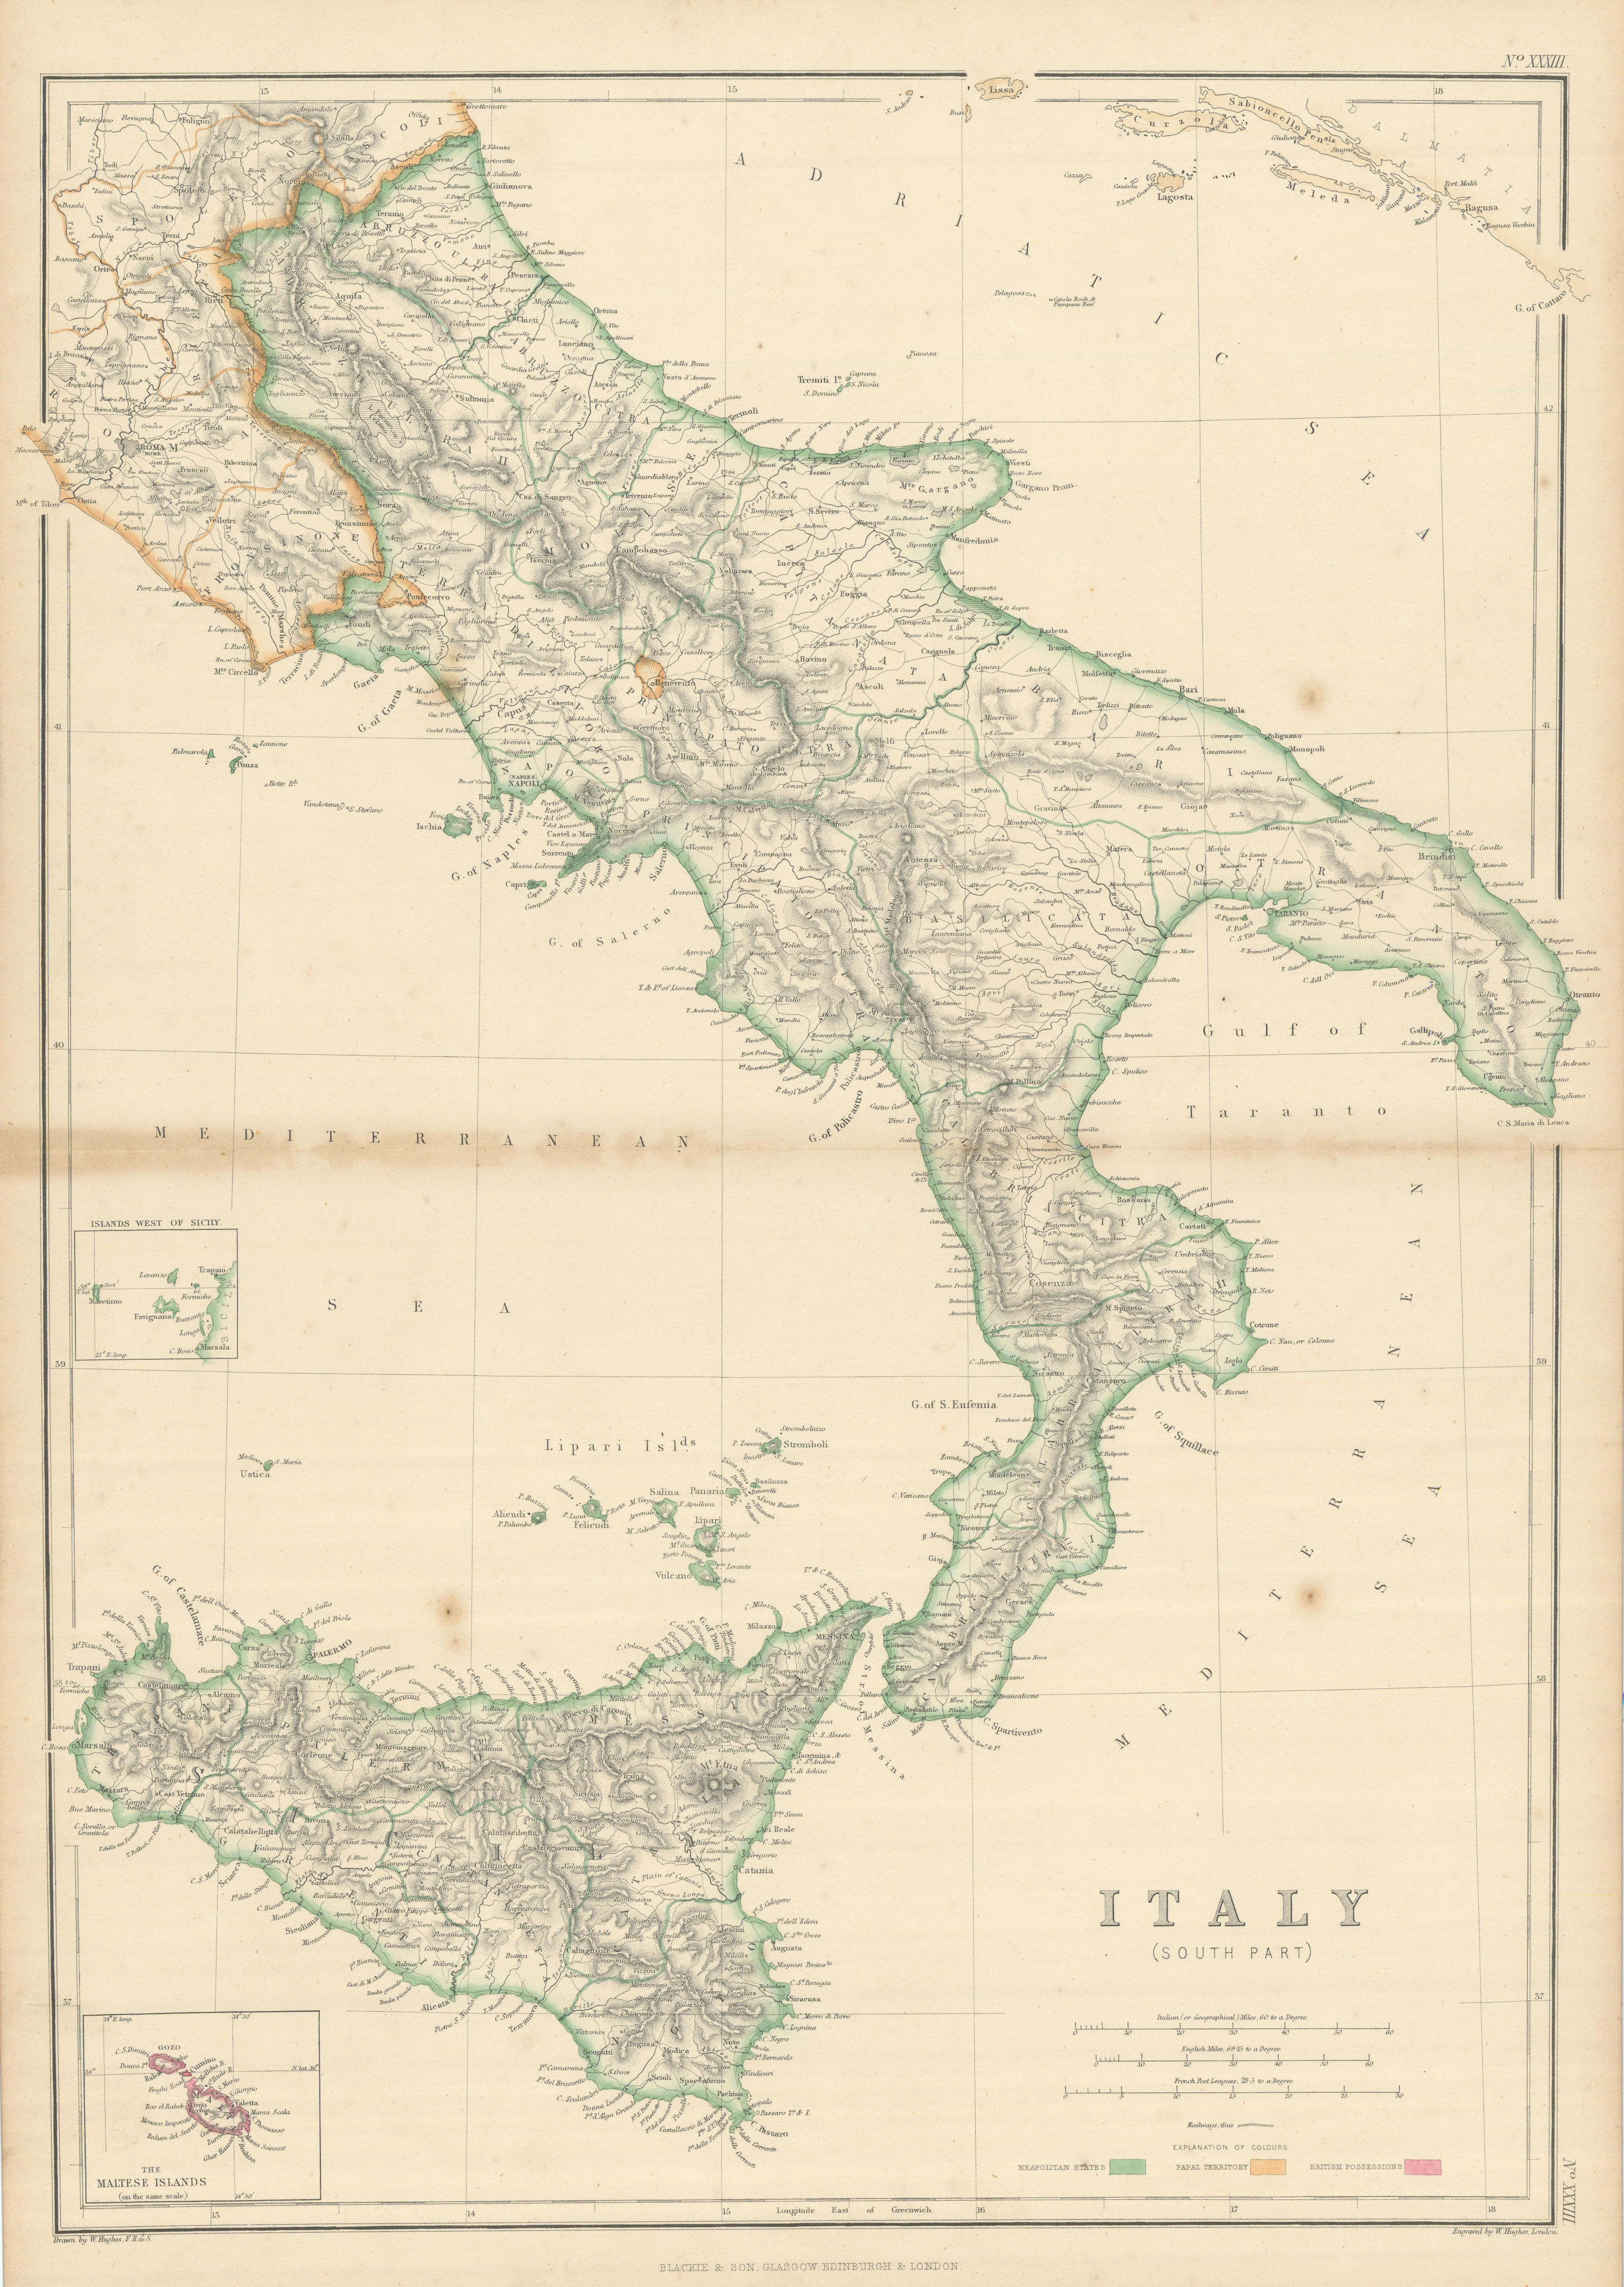 Associate Product Southern Italy. Naples. Kingdom of the two Sicilies. By William Hughes 1860 map